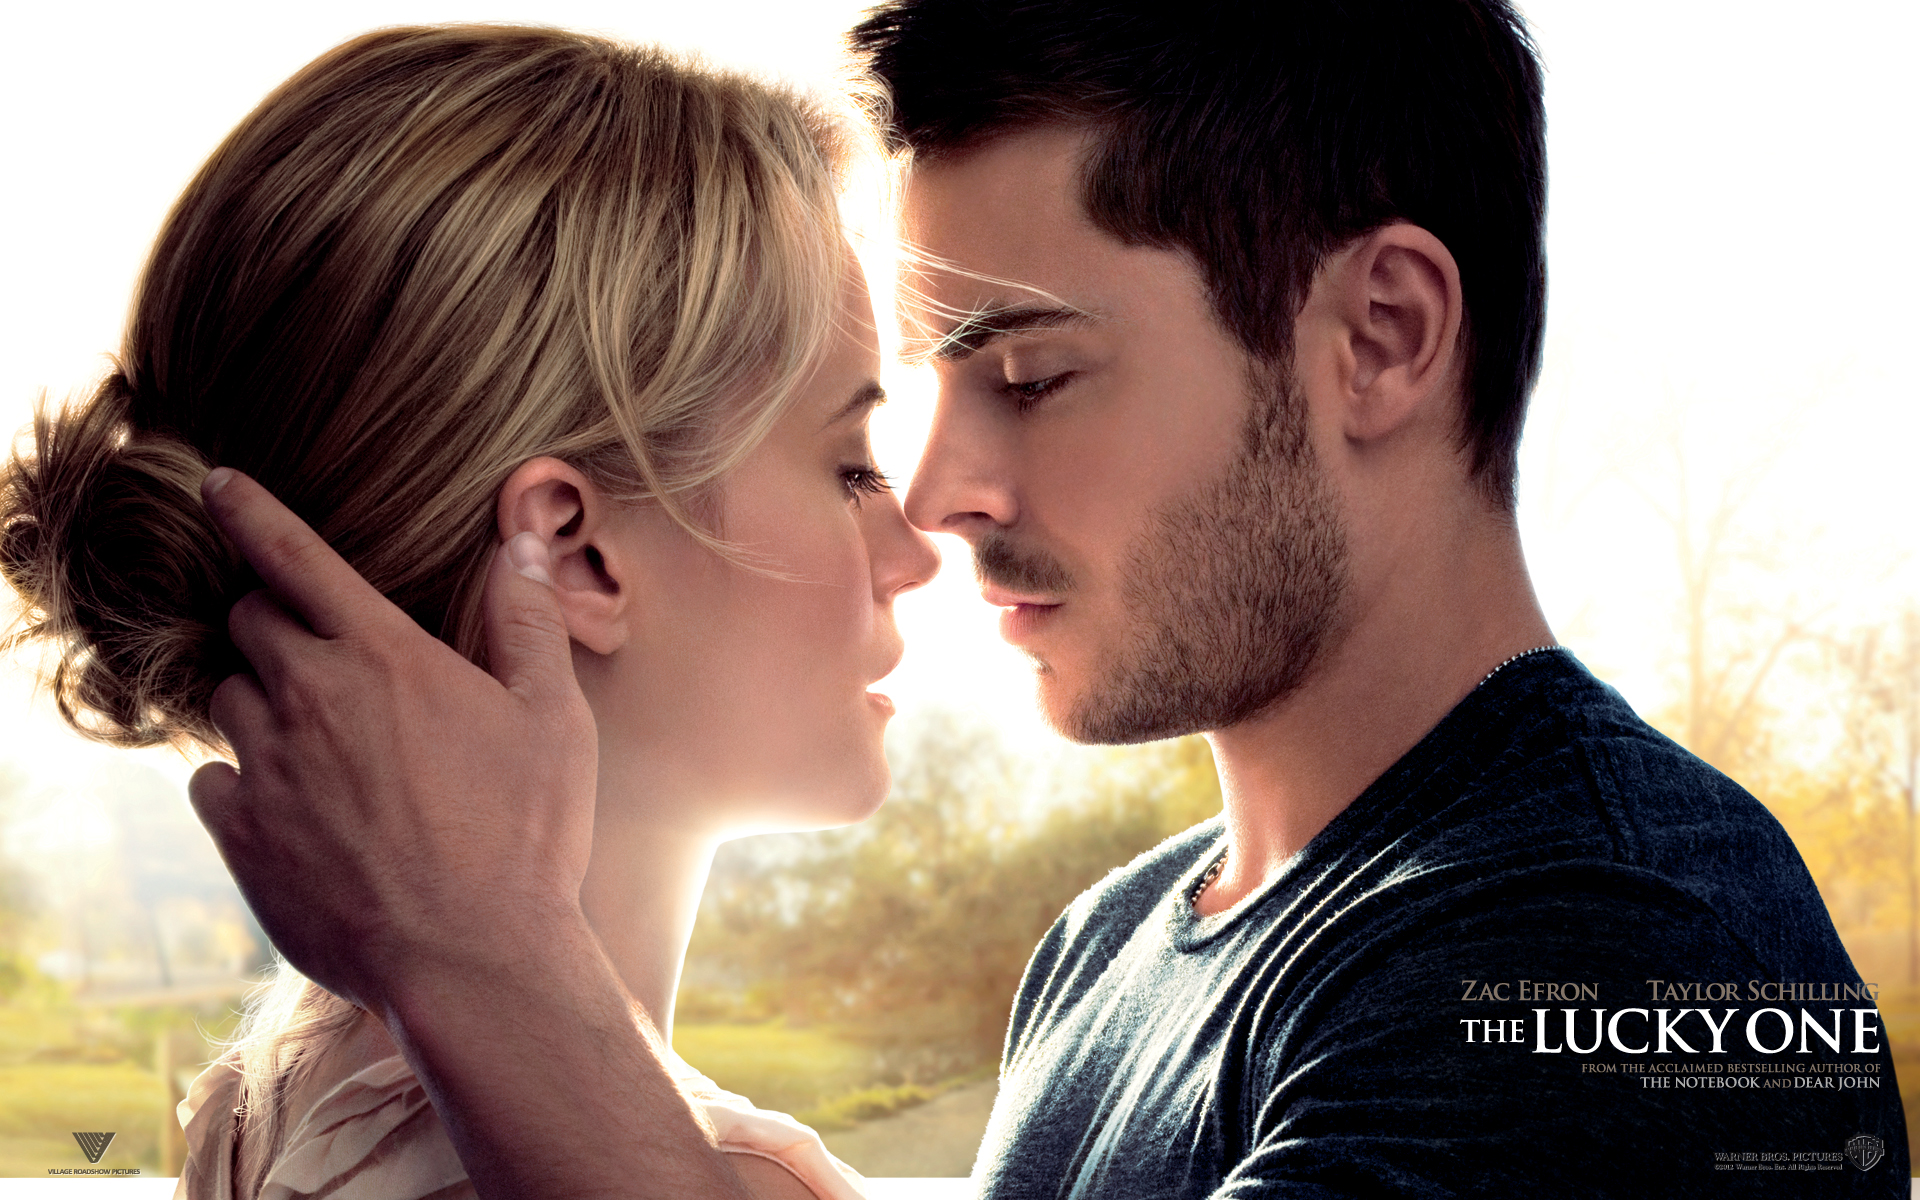 the lucky one, movie, taylor schilling, zac efron cell phone wallpapers